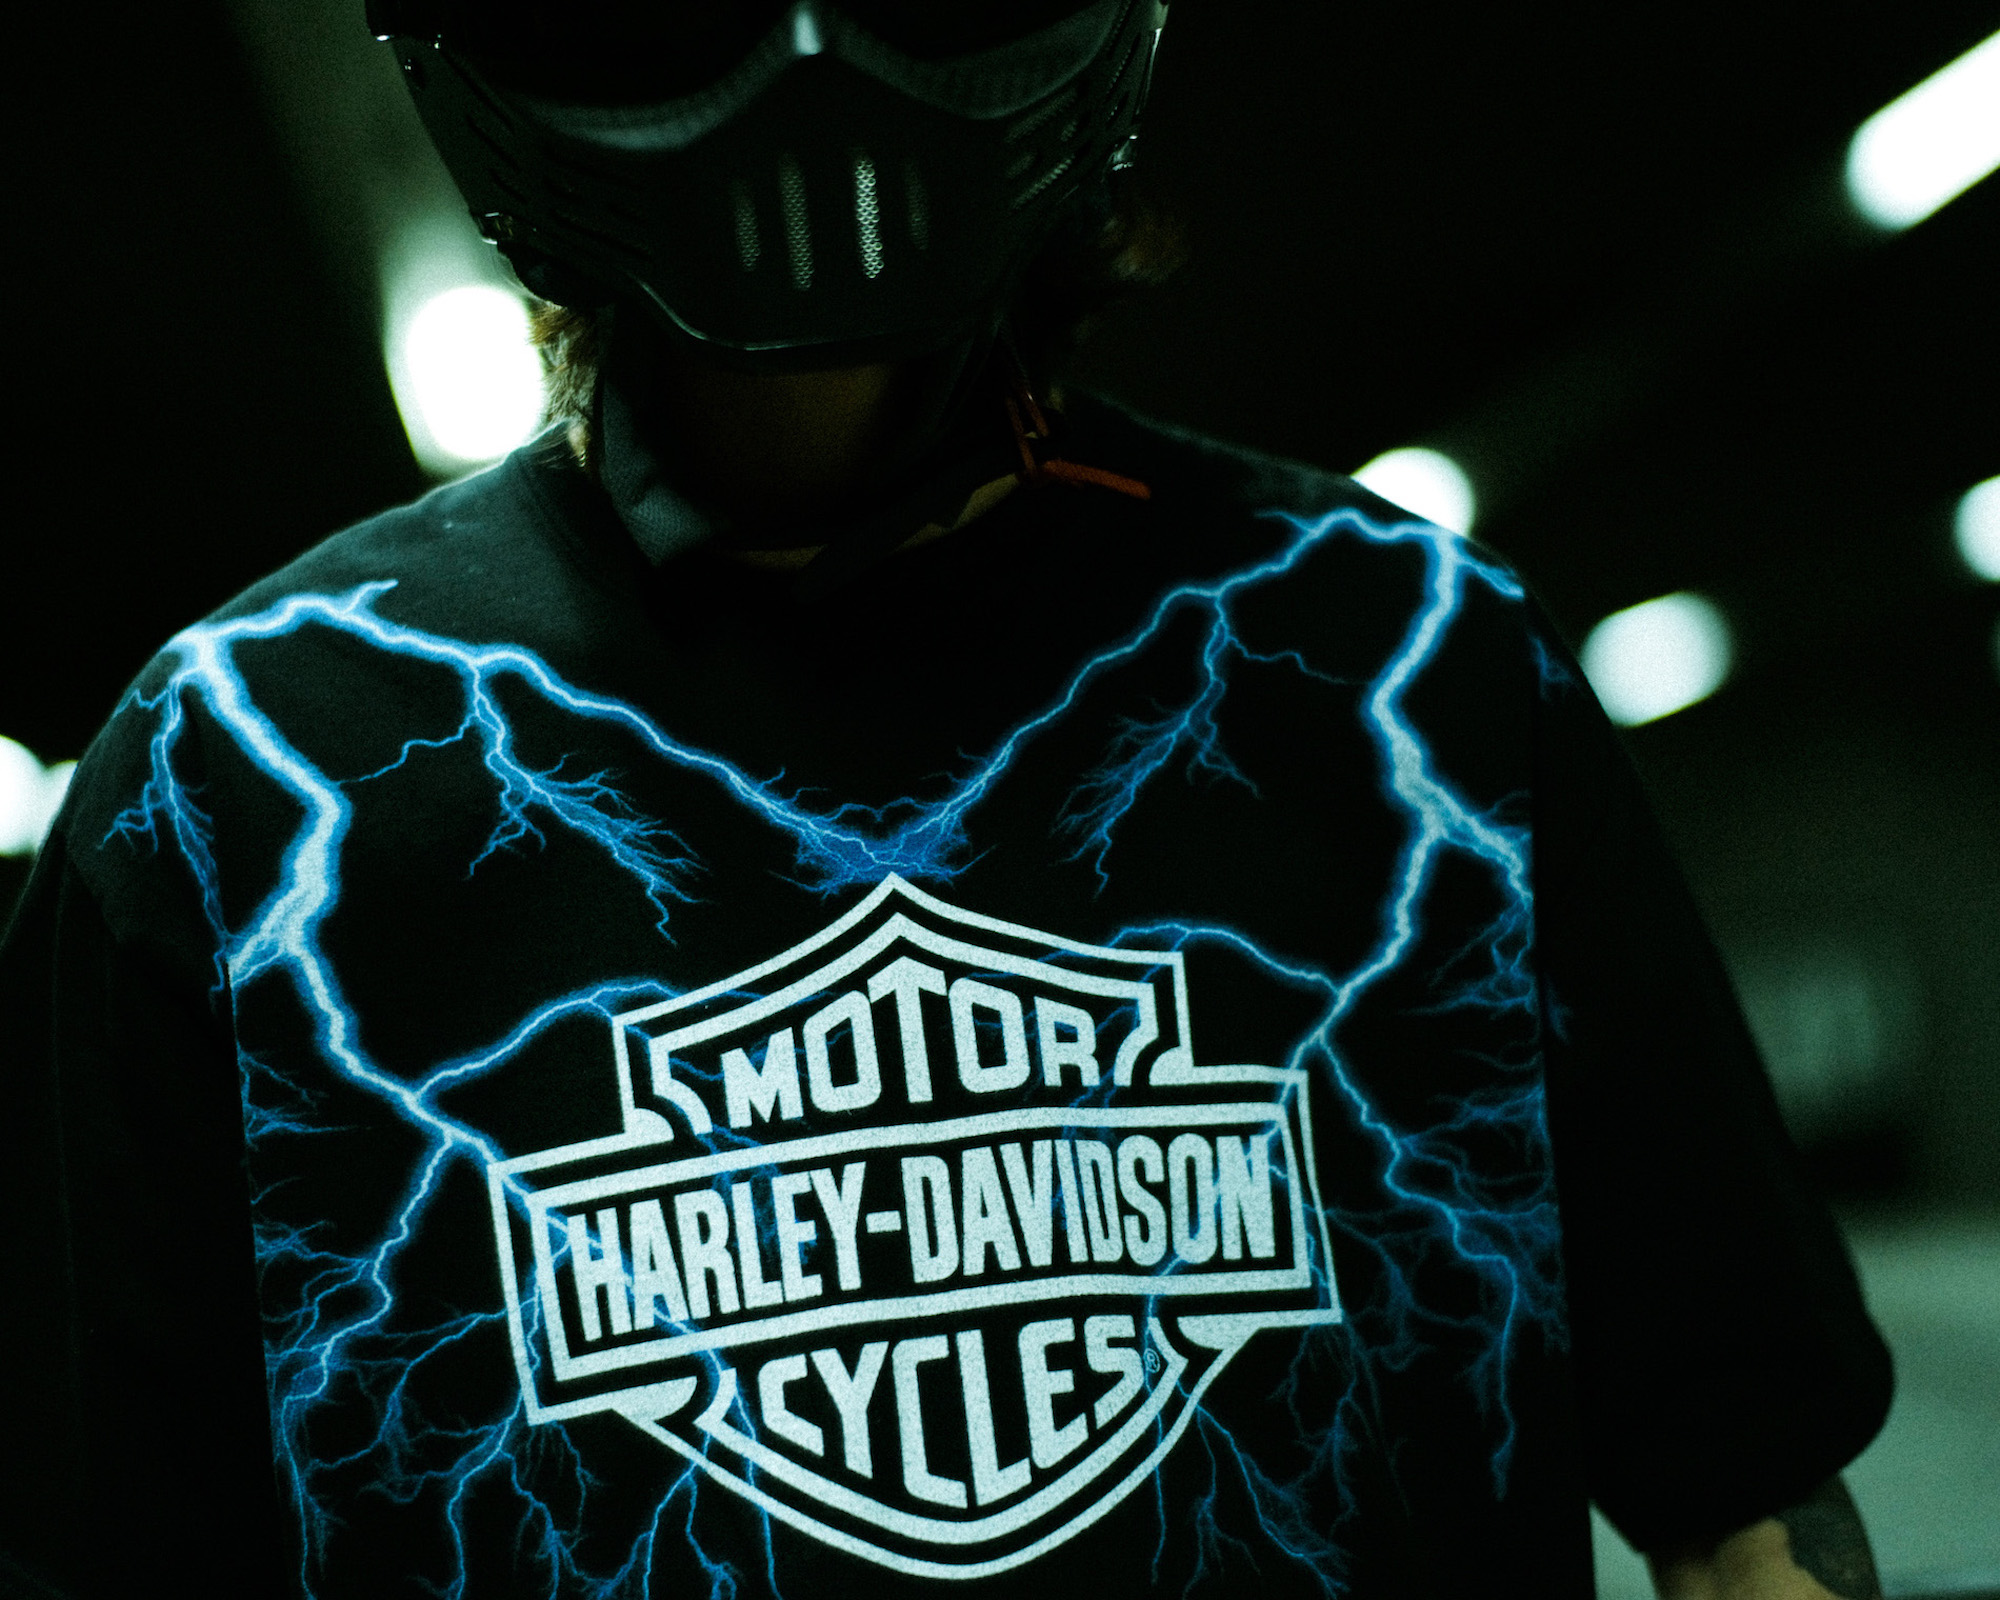 A view of pieces from the Harley-Davidson x NEIGHBORHOOD collection. Media sourced from Modern Notoriety.